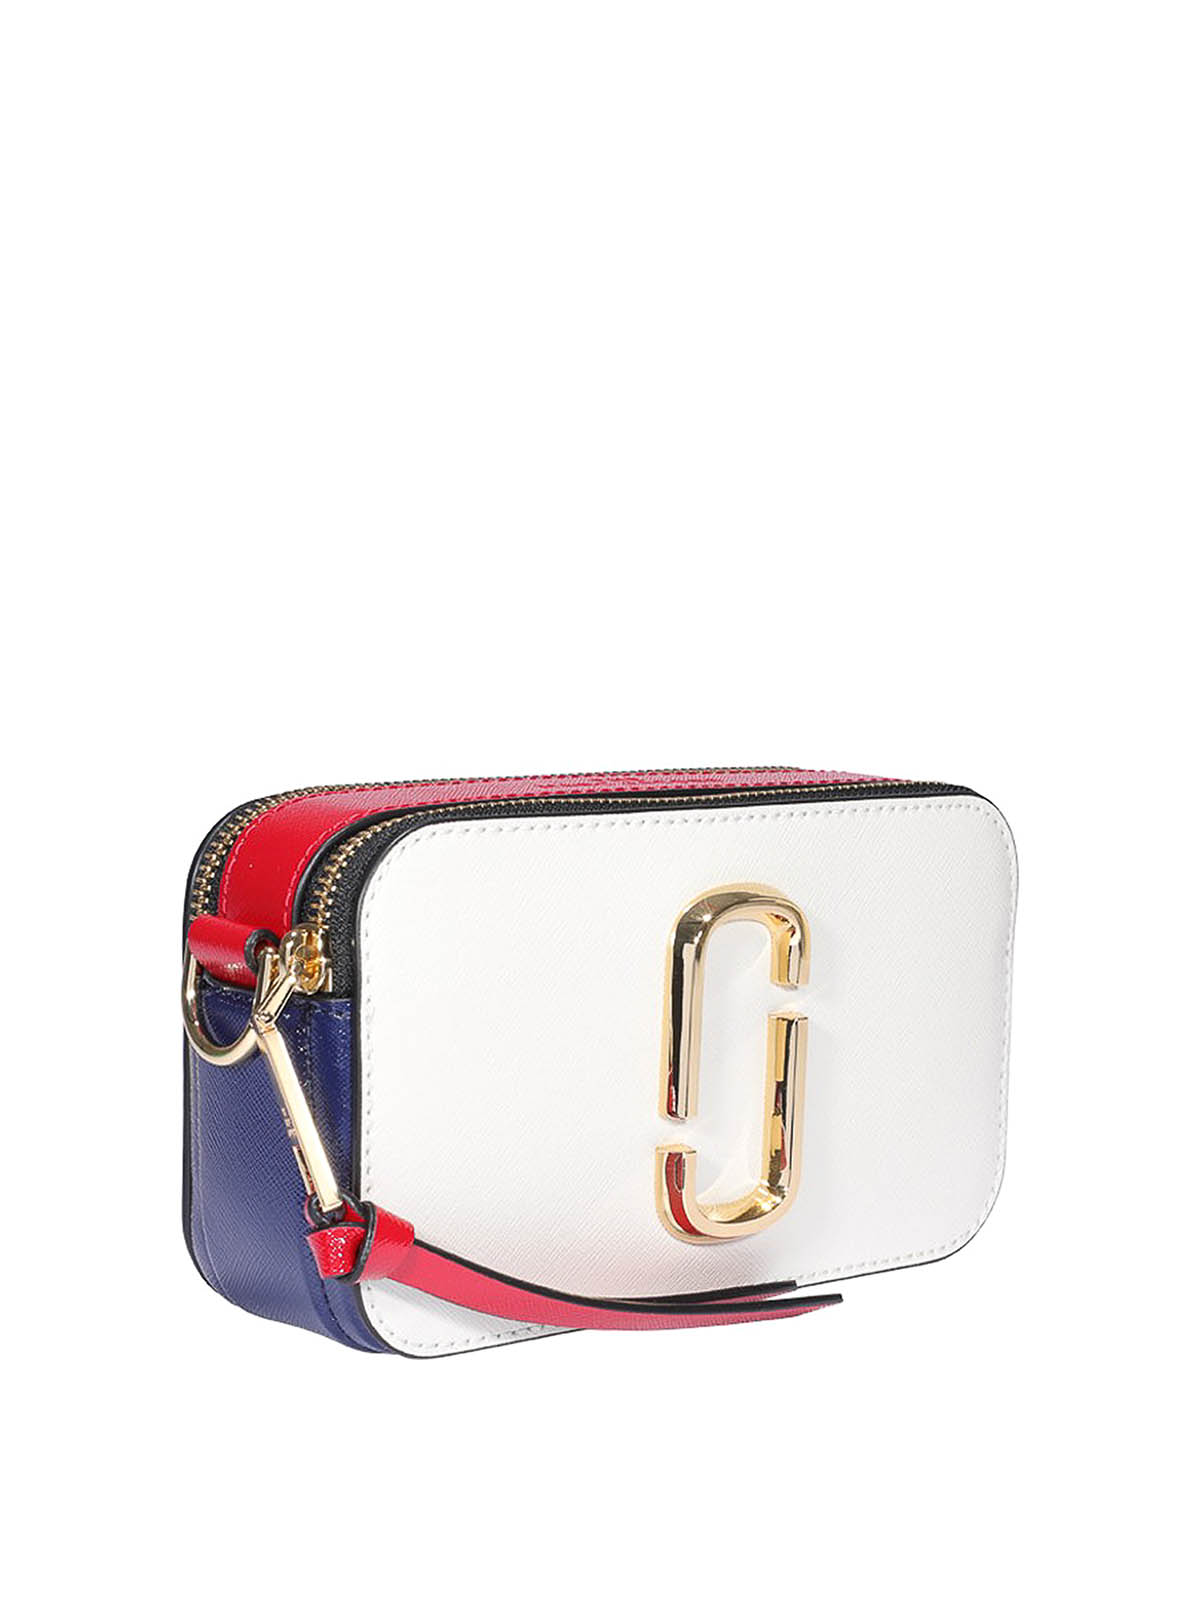 Marc Jacobs The Snapshot Crossbody Bag Multicolor in Leather with